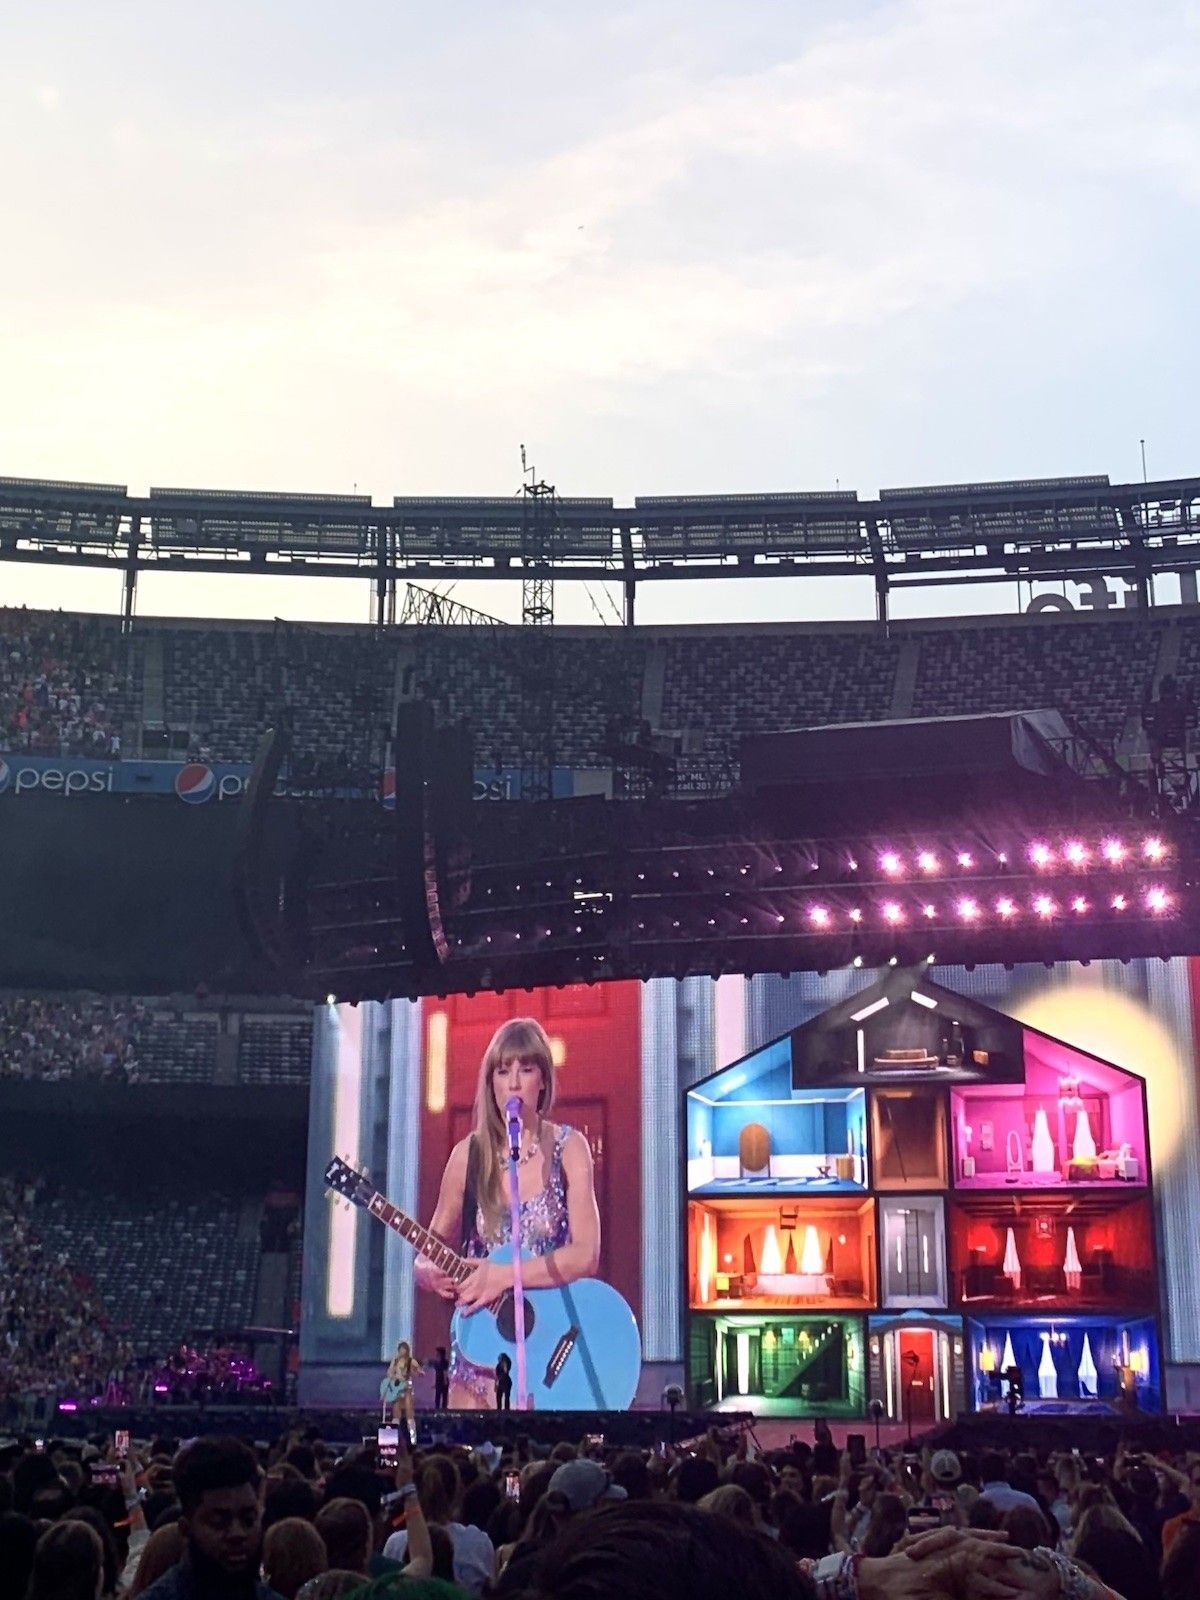 This is why we can have nice things: Taylor Swift's Reputation tour hits  Wembley Stadium